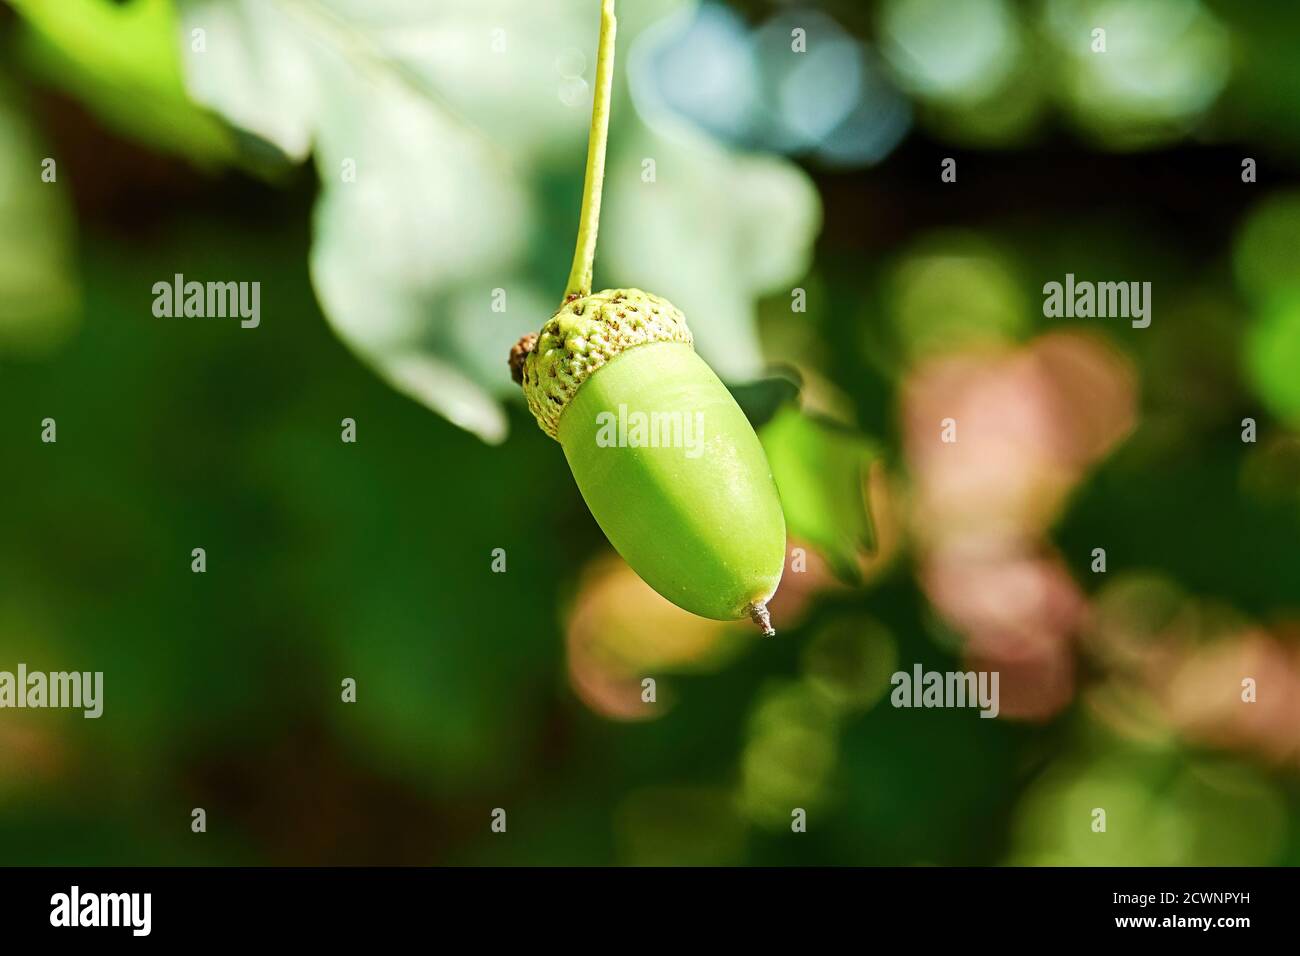 Single green acorn on growth on an oak tree branch. Nature backgrounds Stock Photo